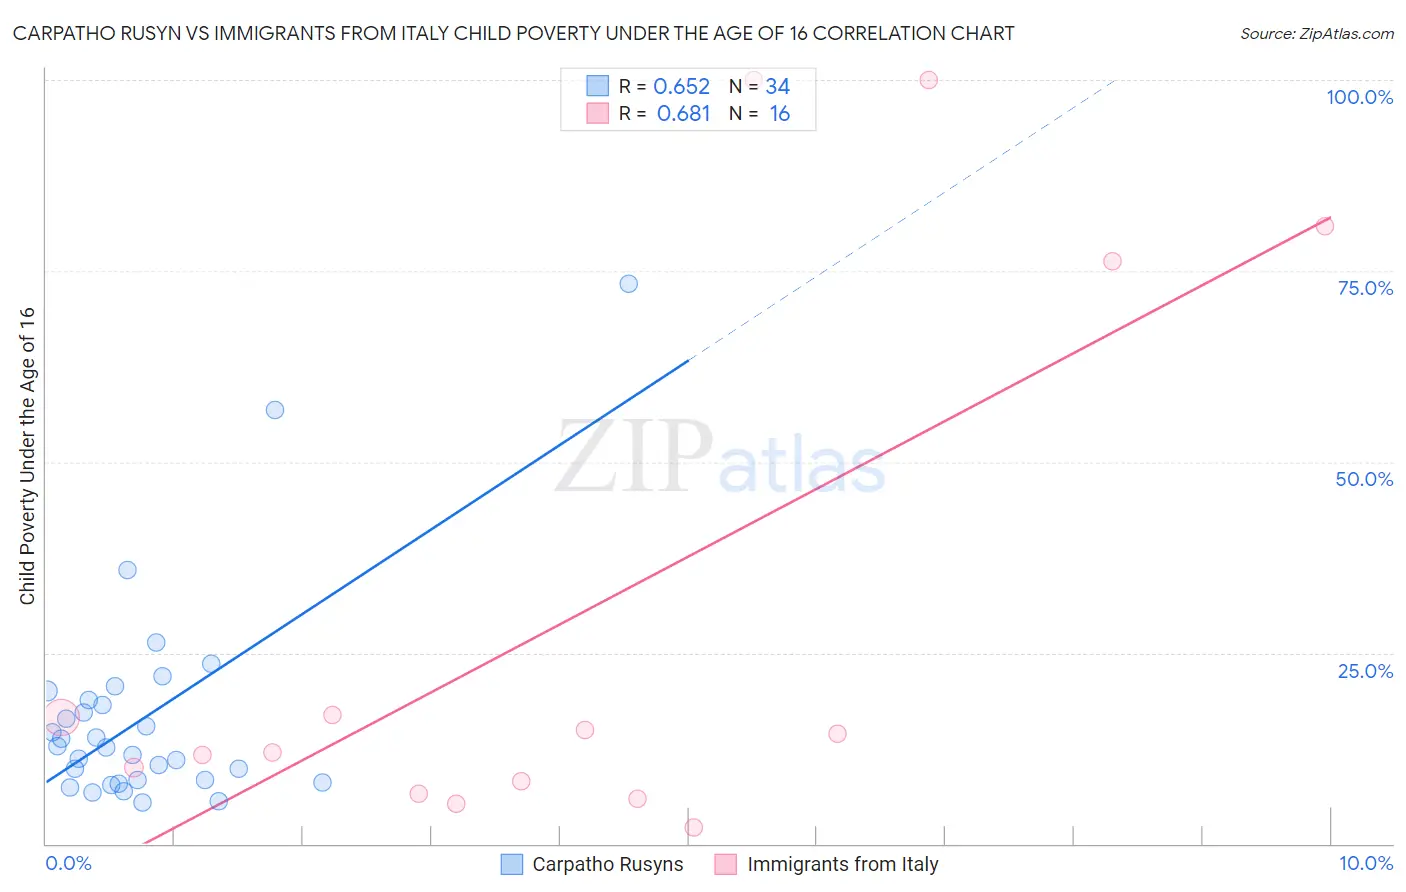 Carpatho Rusyn vs Immigrants from Italy Child Poverty Under the Age of 16